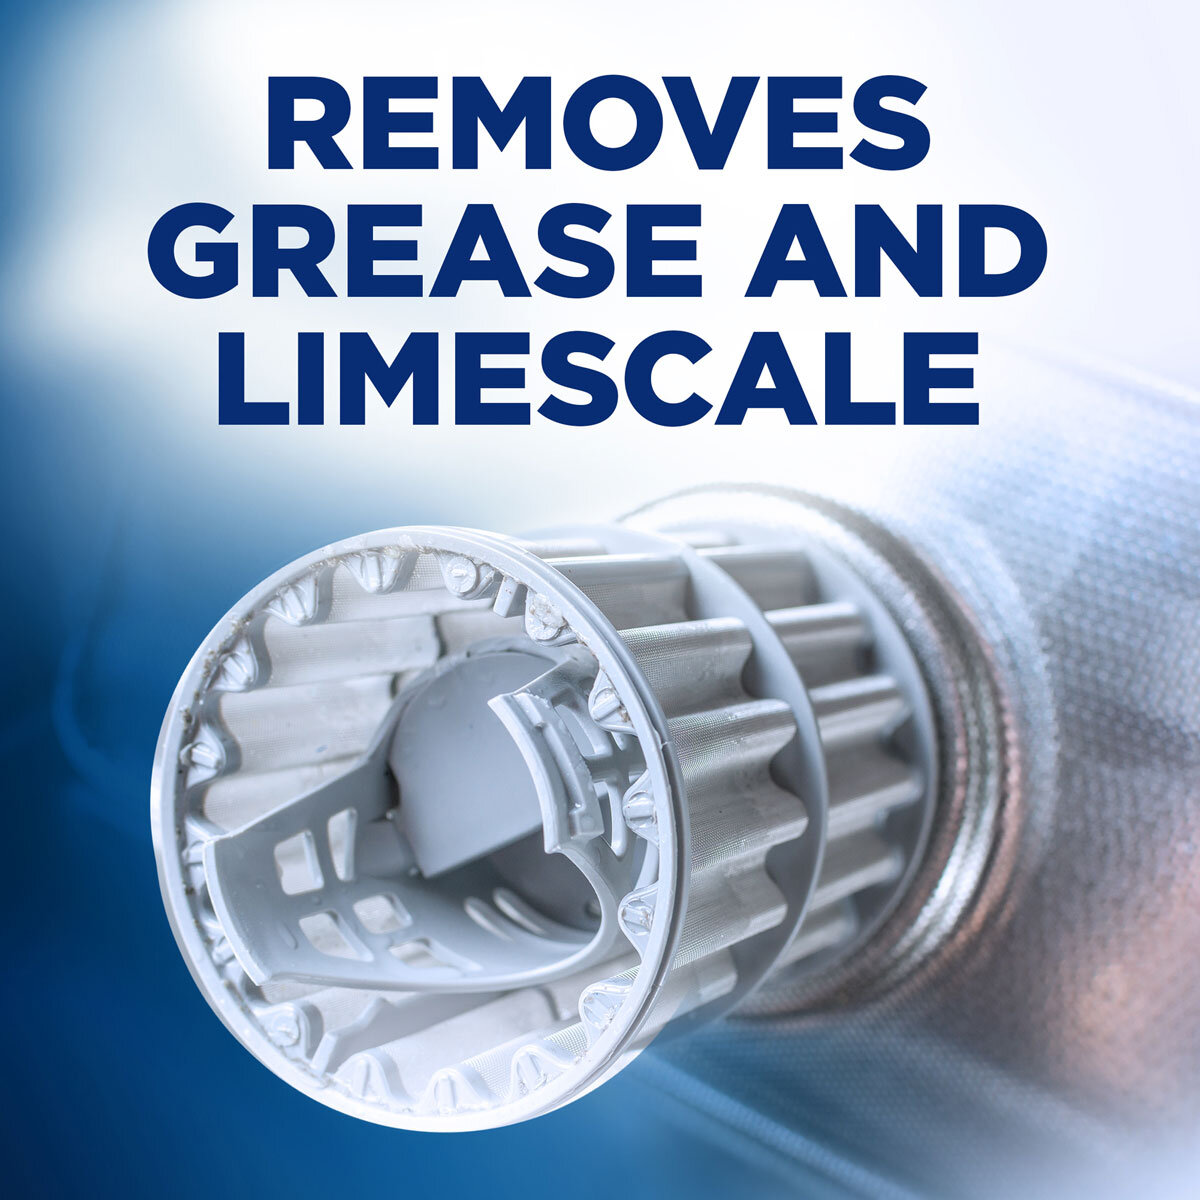 Removes Grease and Limescale